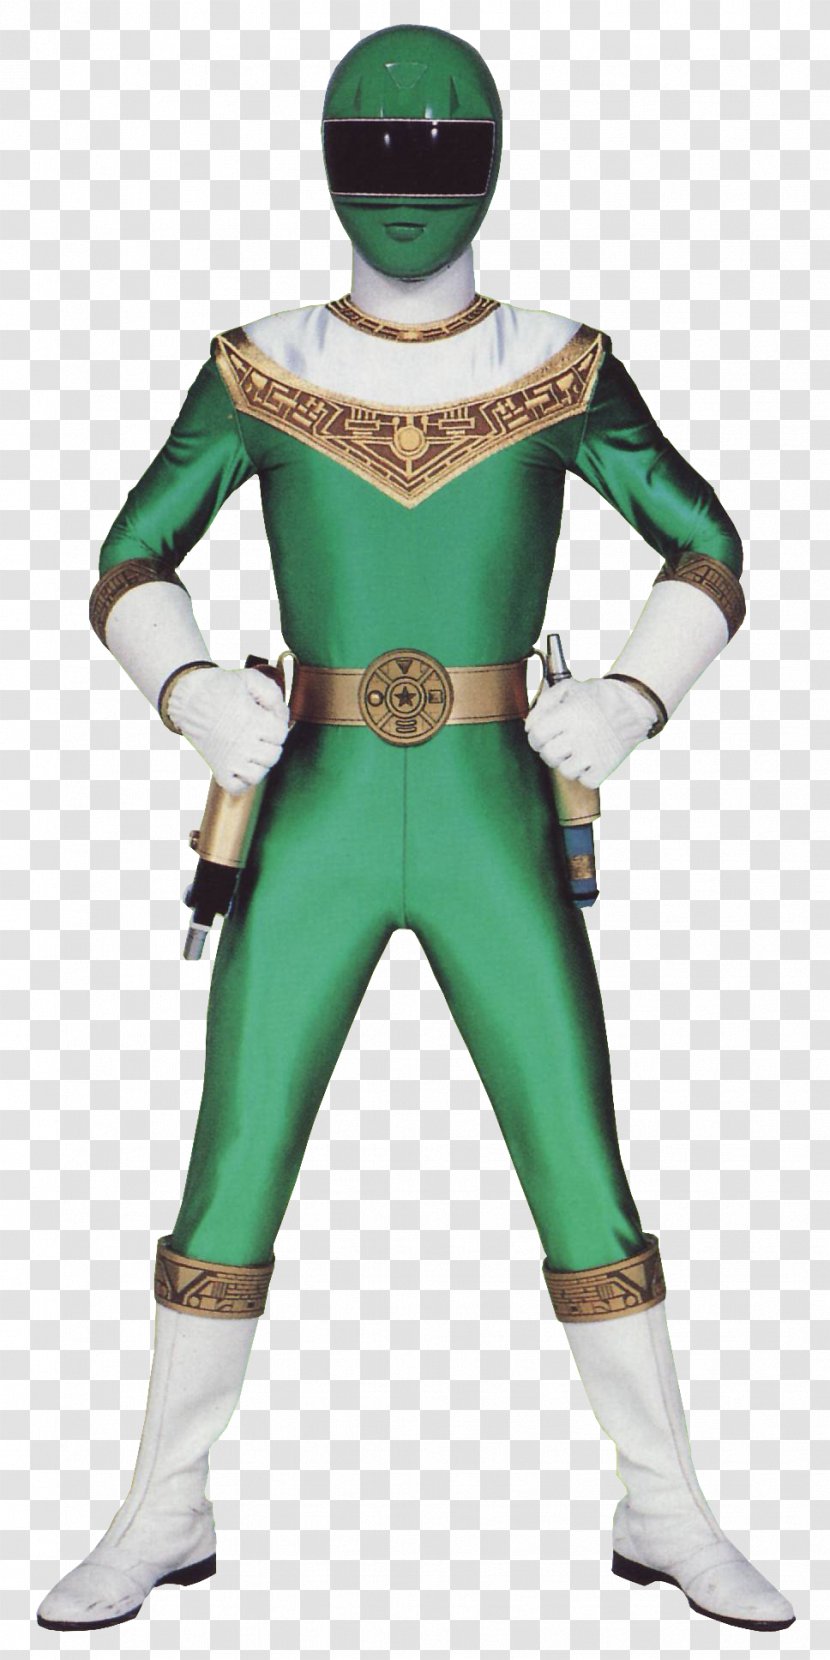 Tommy Oliver Red Ranger Super Sentai Power Rangers S.P.D. Lost Galaxy - Costume Design Transparent PNG